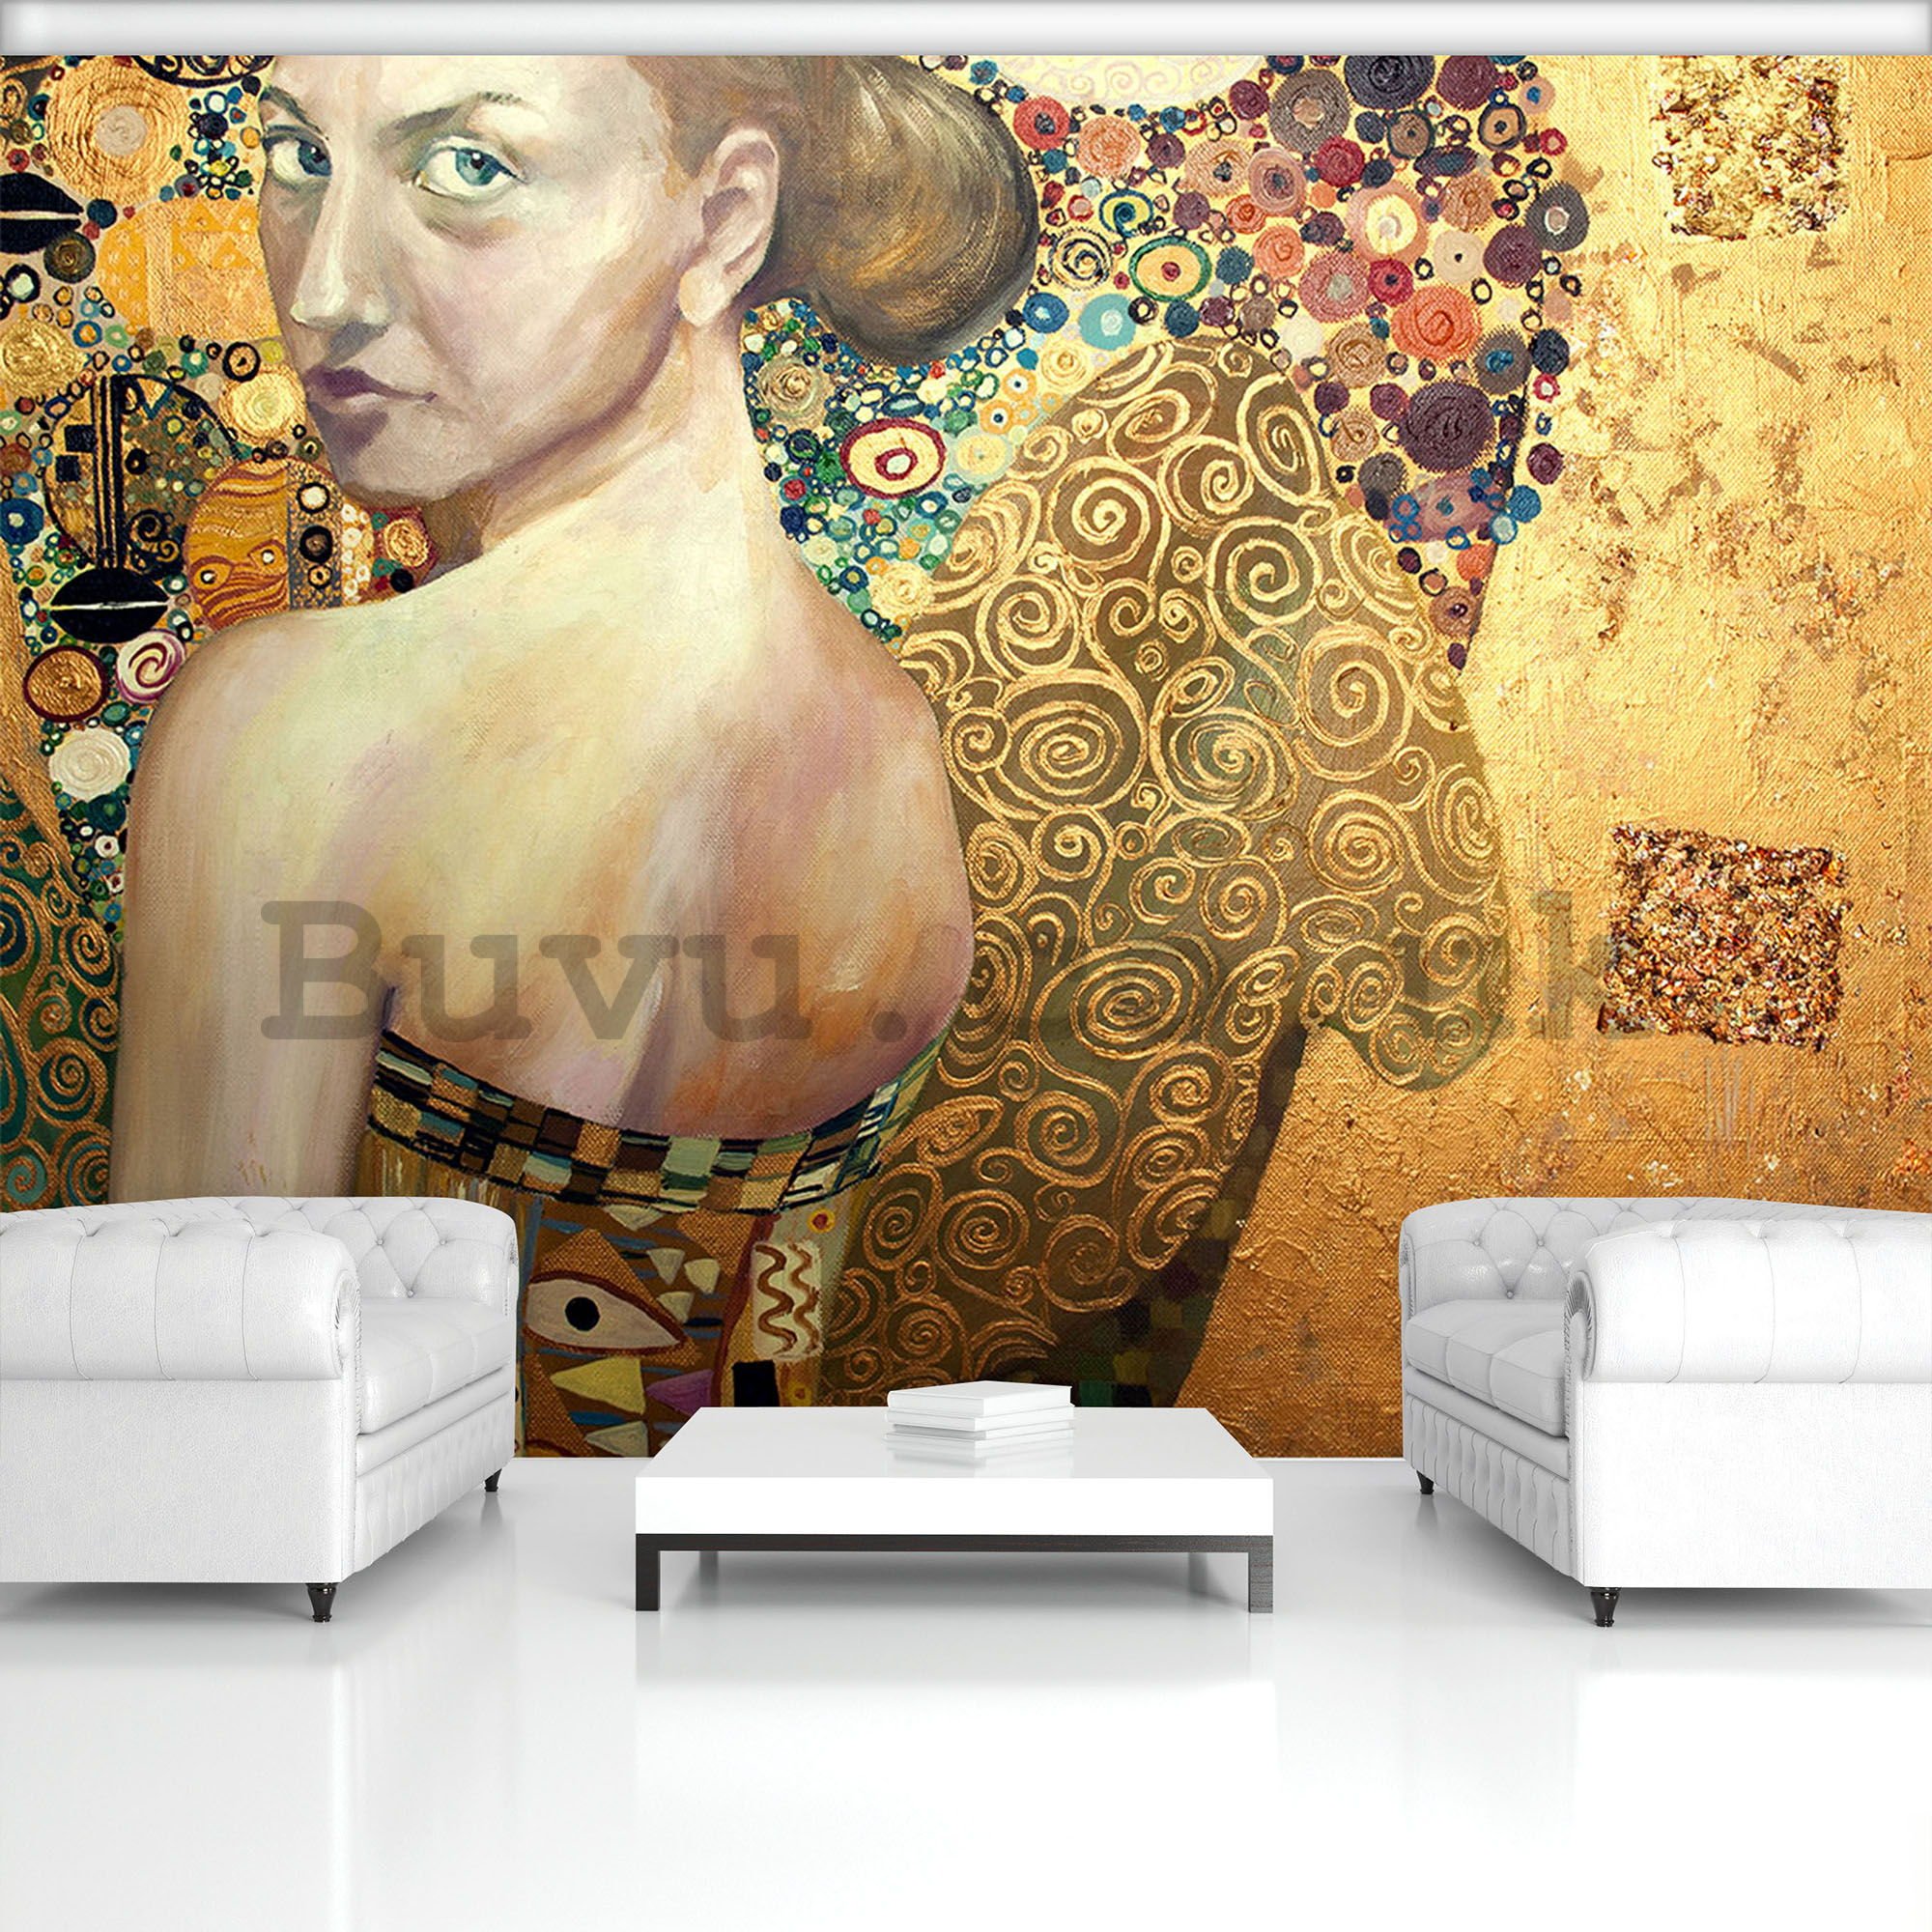 Wall mural: Beauty (oil painting) - 254x368 cm